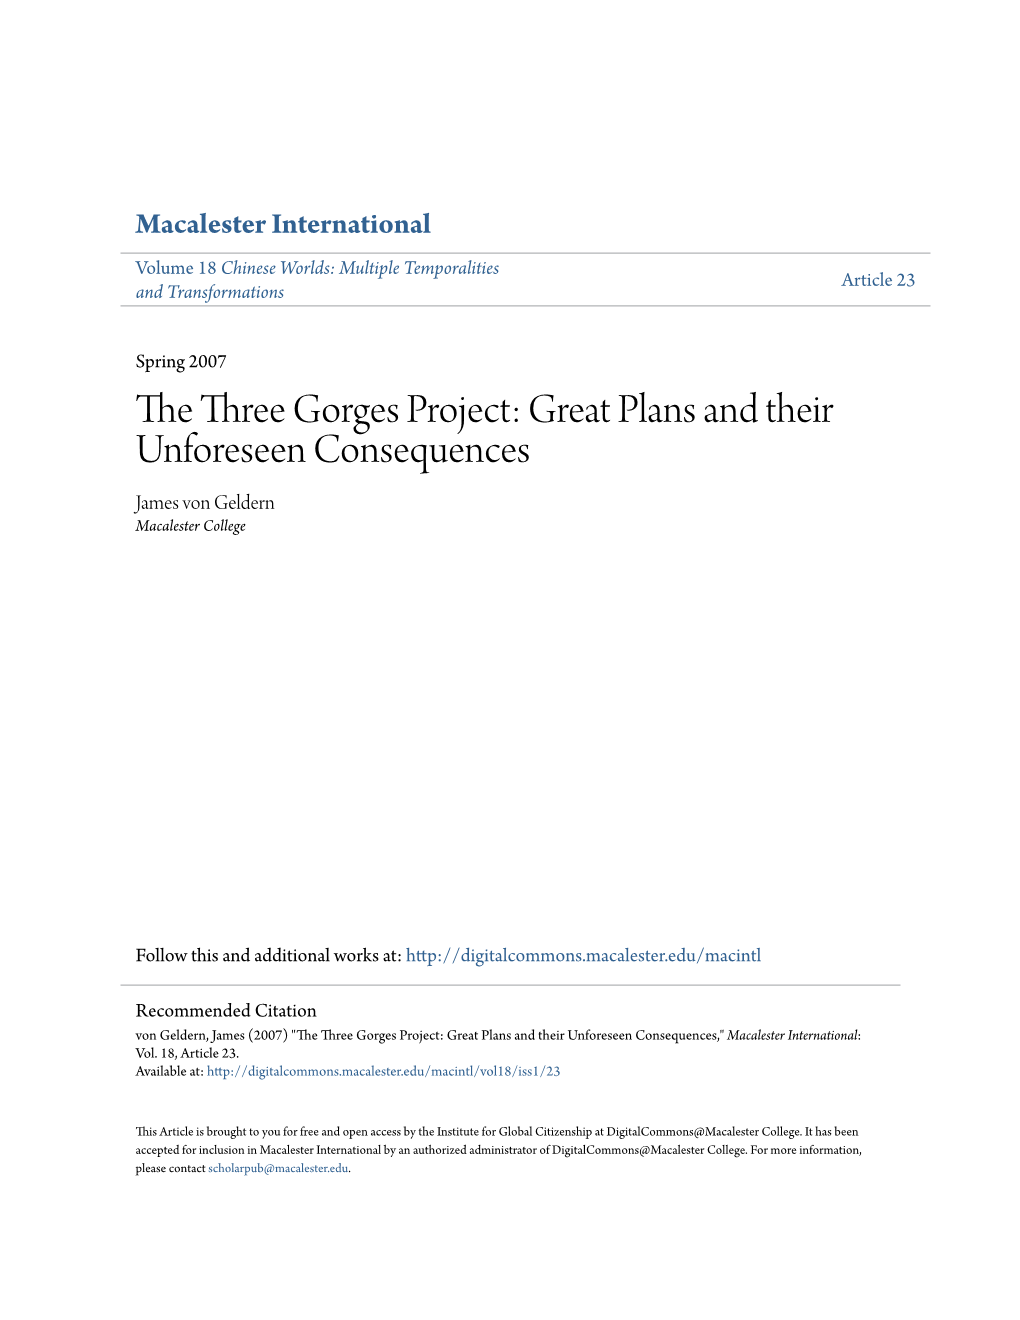 The Three Gorges Project: Great Plans and Their Unforeseen Consequences James Von Geldern Macalester College